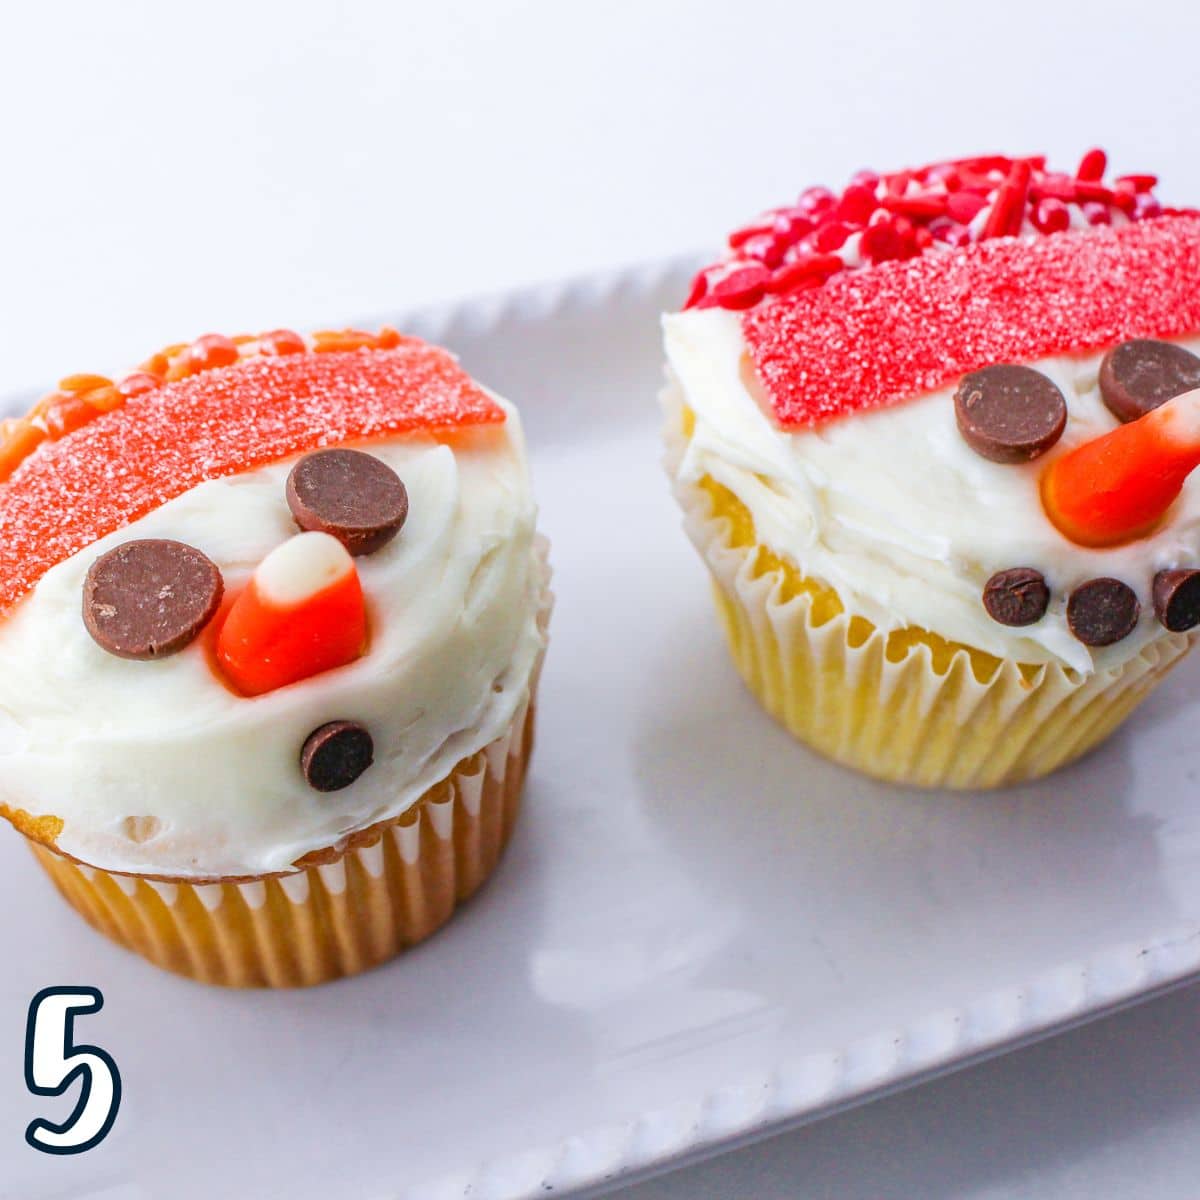 Two snowman cupcakes on a white plate.